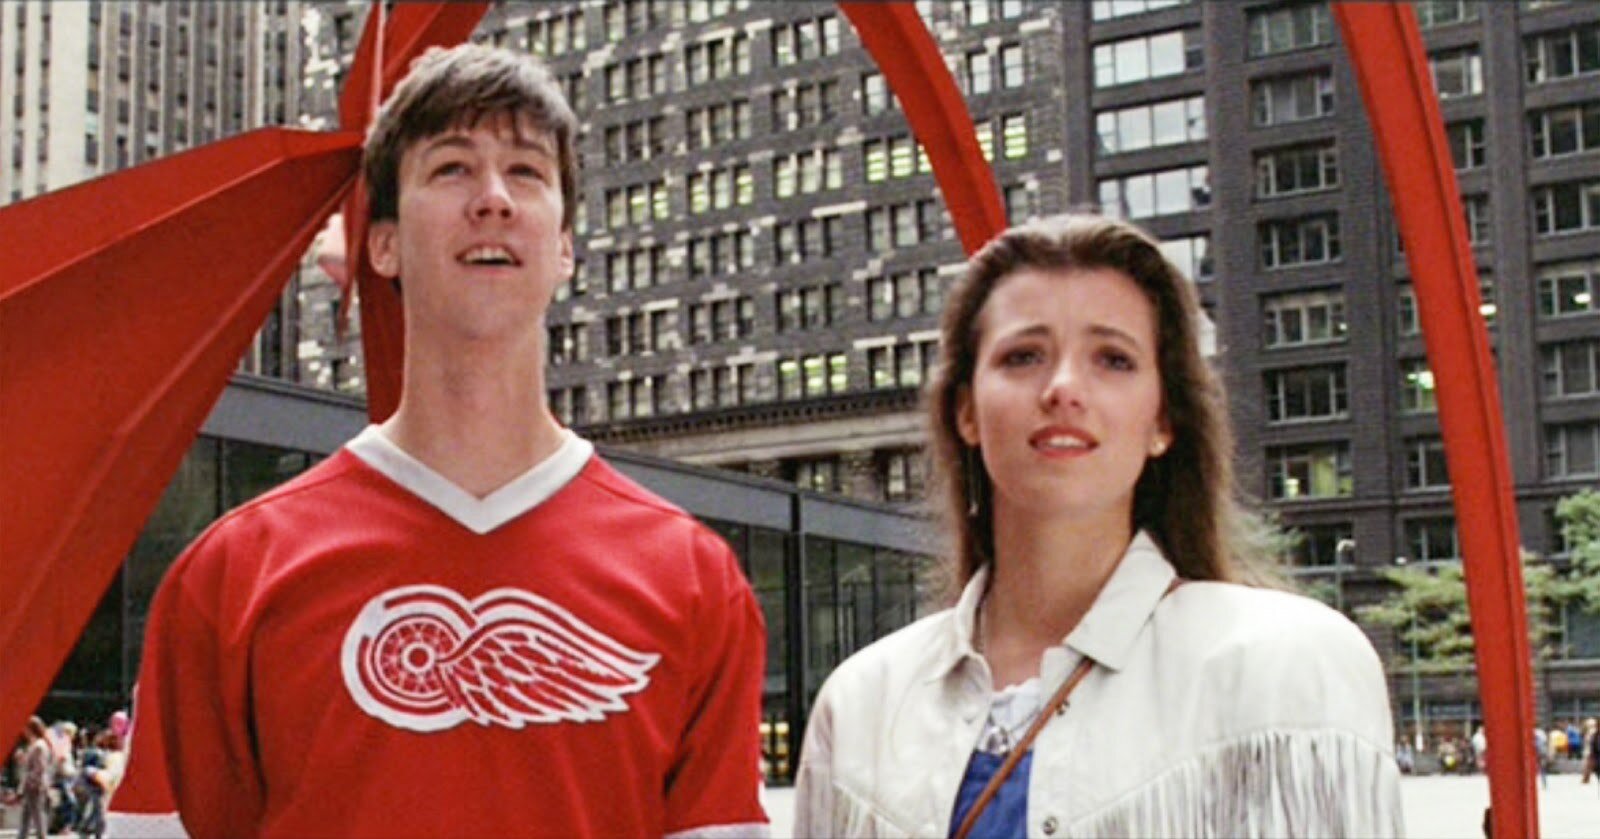 Whatever Happened To Cameron From Ferris Bueller's Day Off?